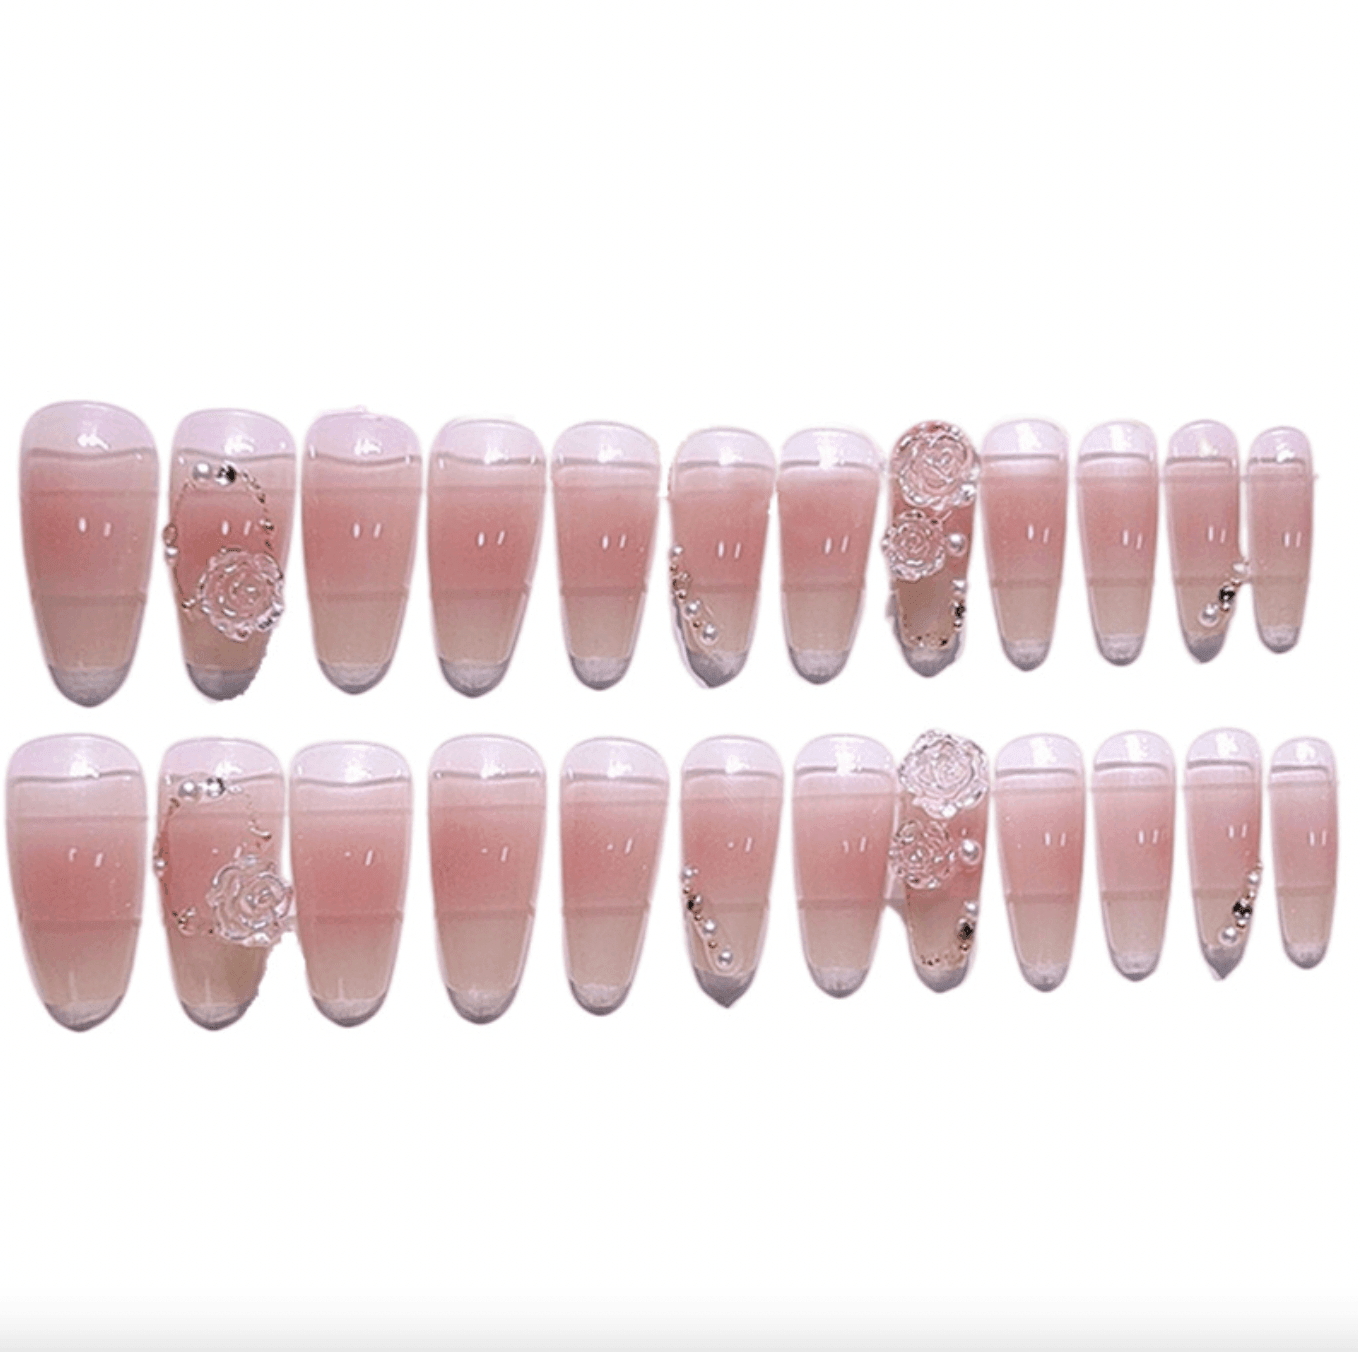 Golden Nails - Pink & White ombré with Rhine stones design